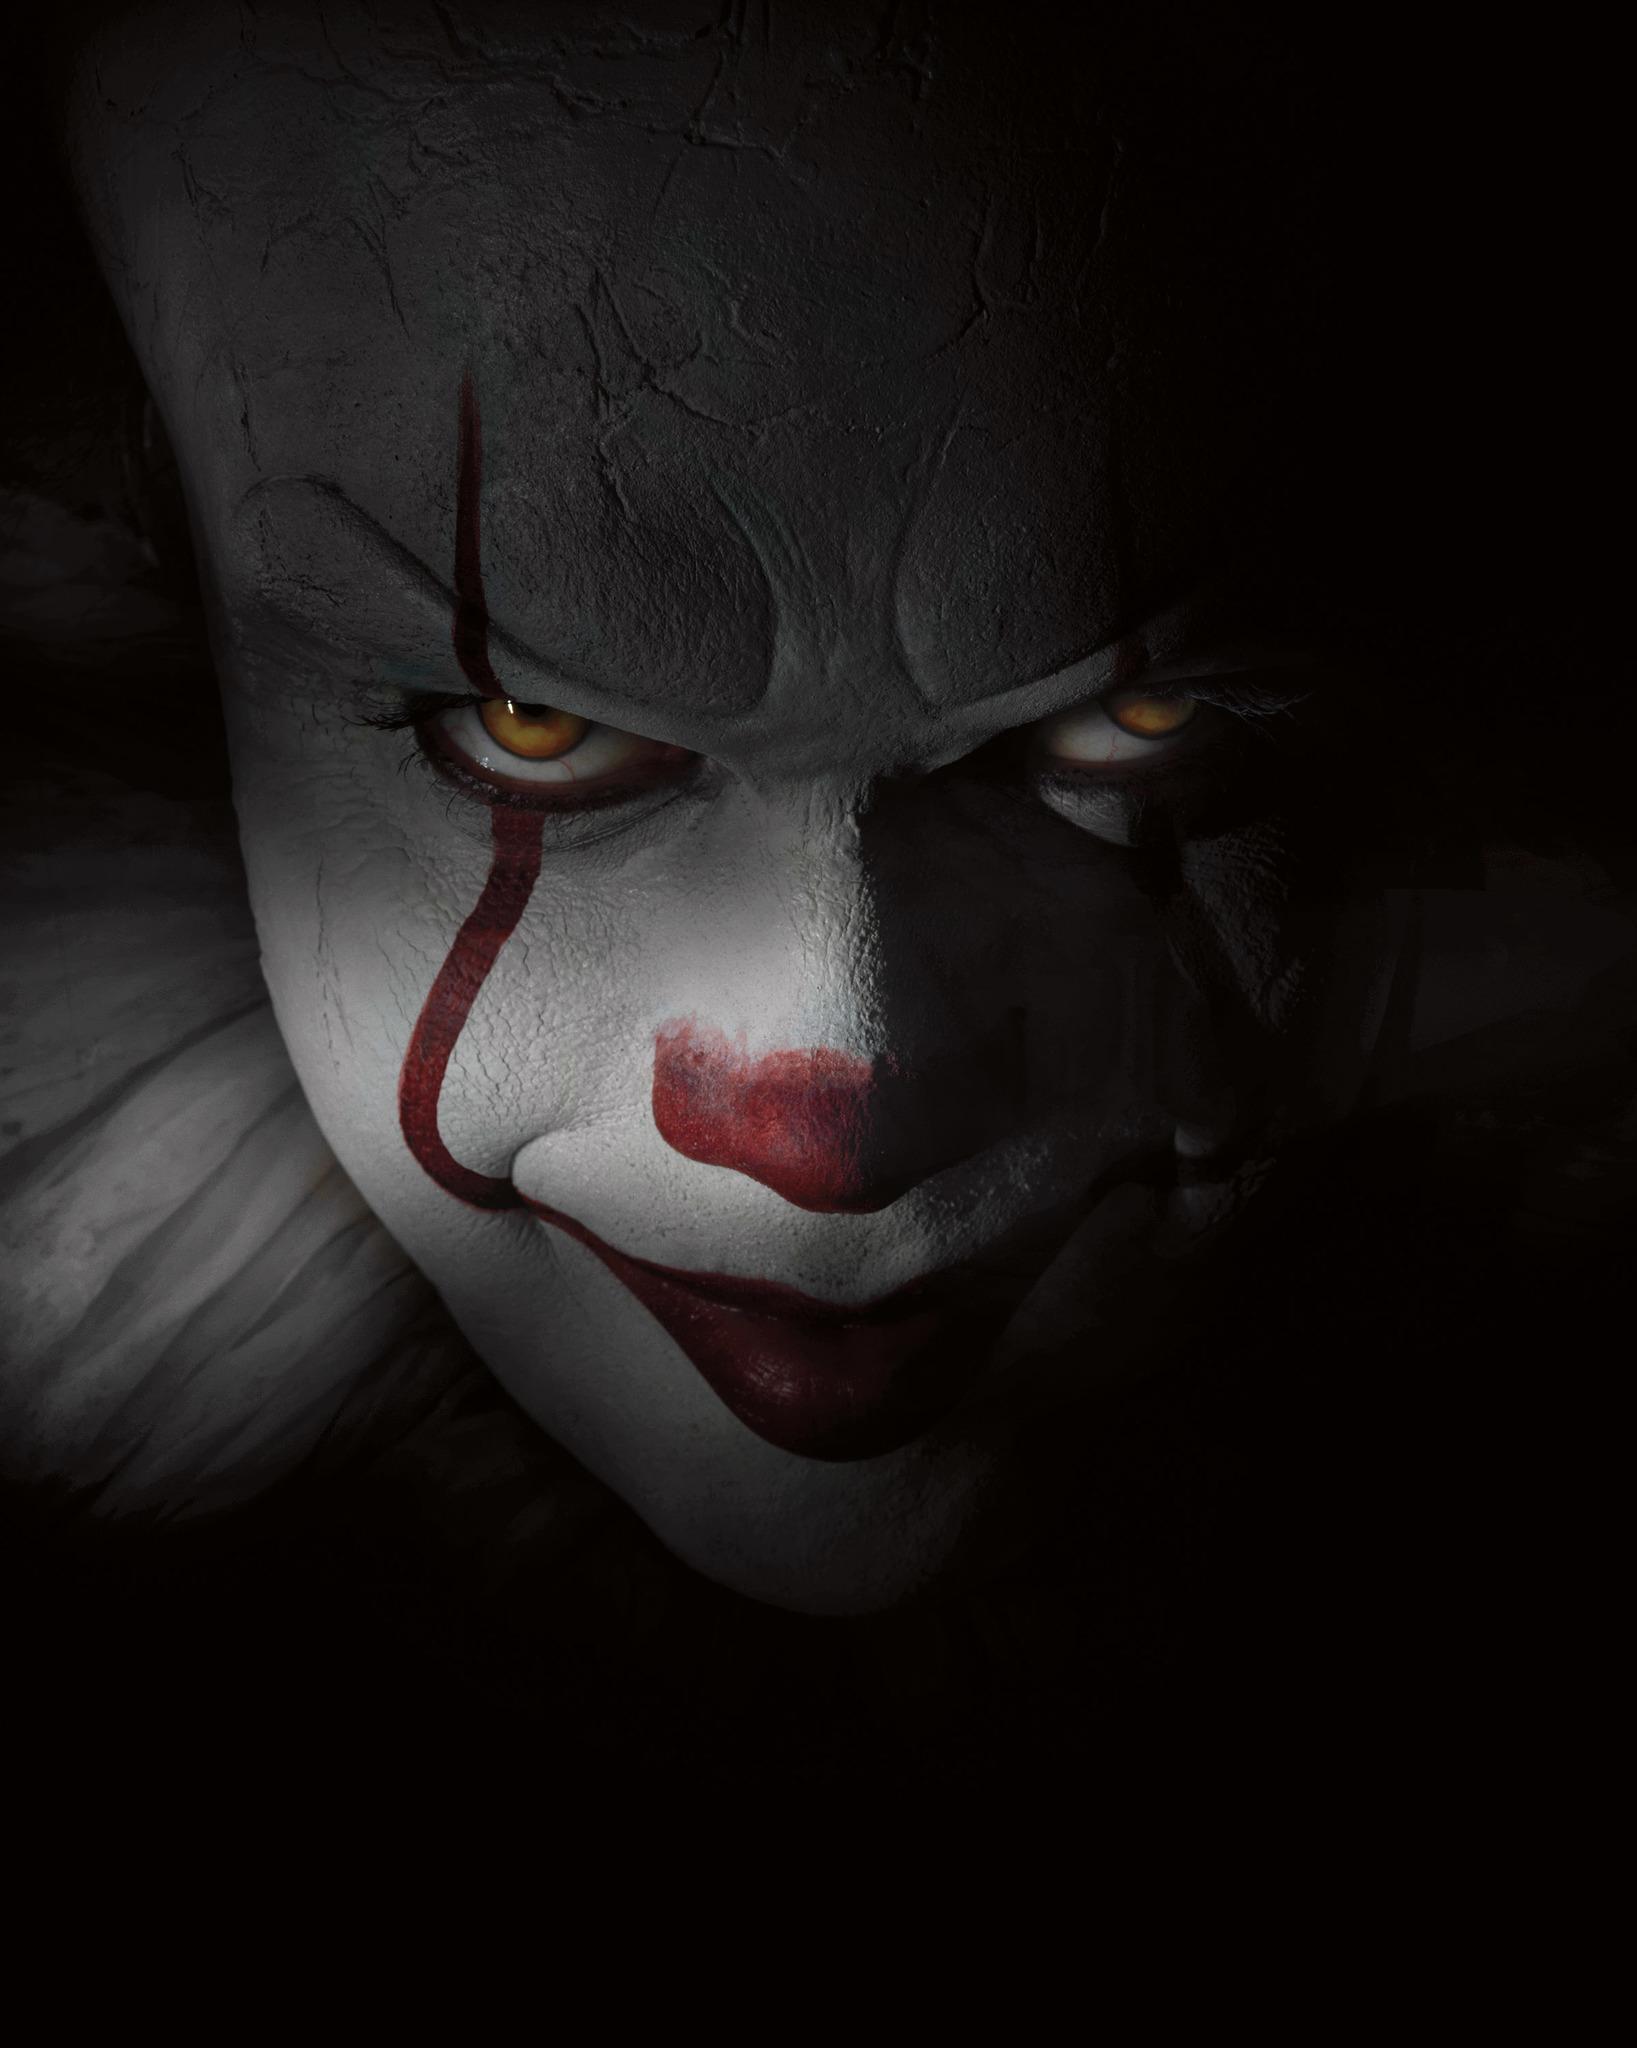 It: Stephen King's terrifying tale centers around the town of Derry, where a group of kids face unimaginable horrors when they encounter the malevolent entity known as Pennywise the Dancing Clown.